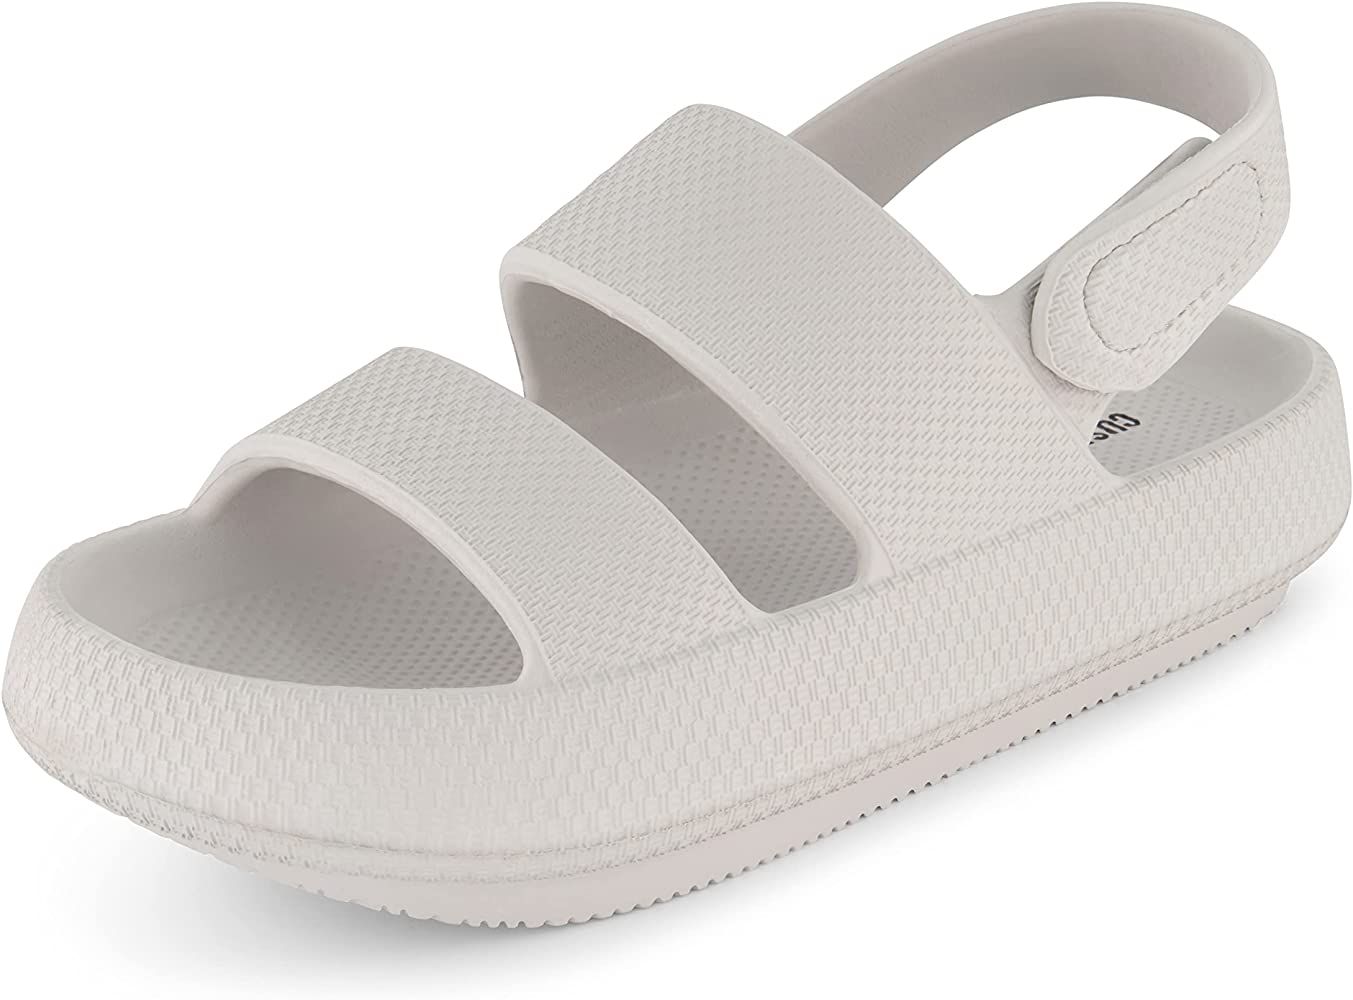 Cushionaire Women's Fuji sandal with adjustable strap and +Comfort | Amazon (US)